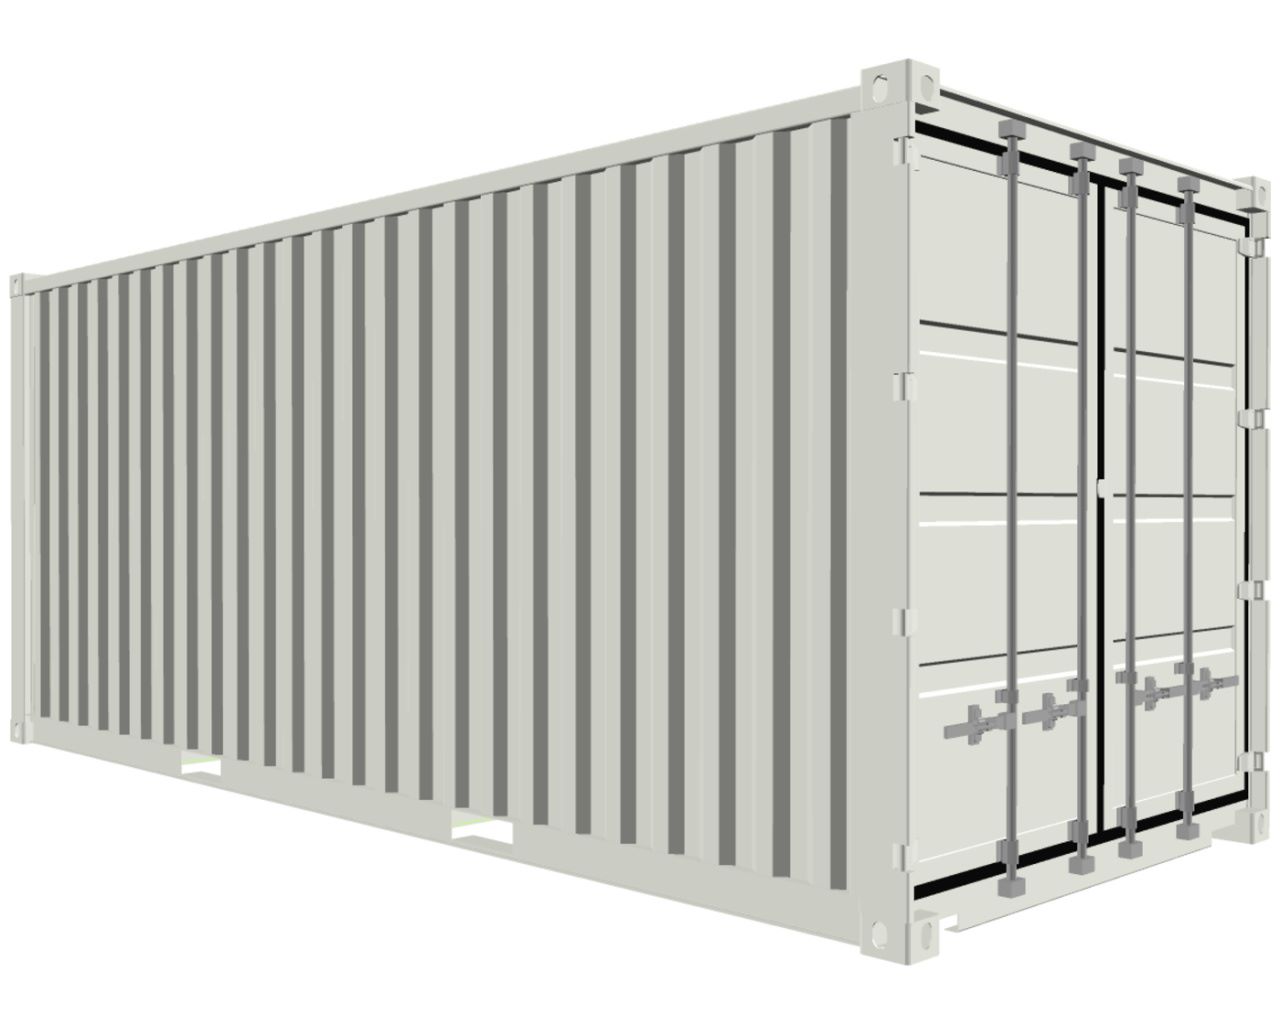 Shipping Container Containex